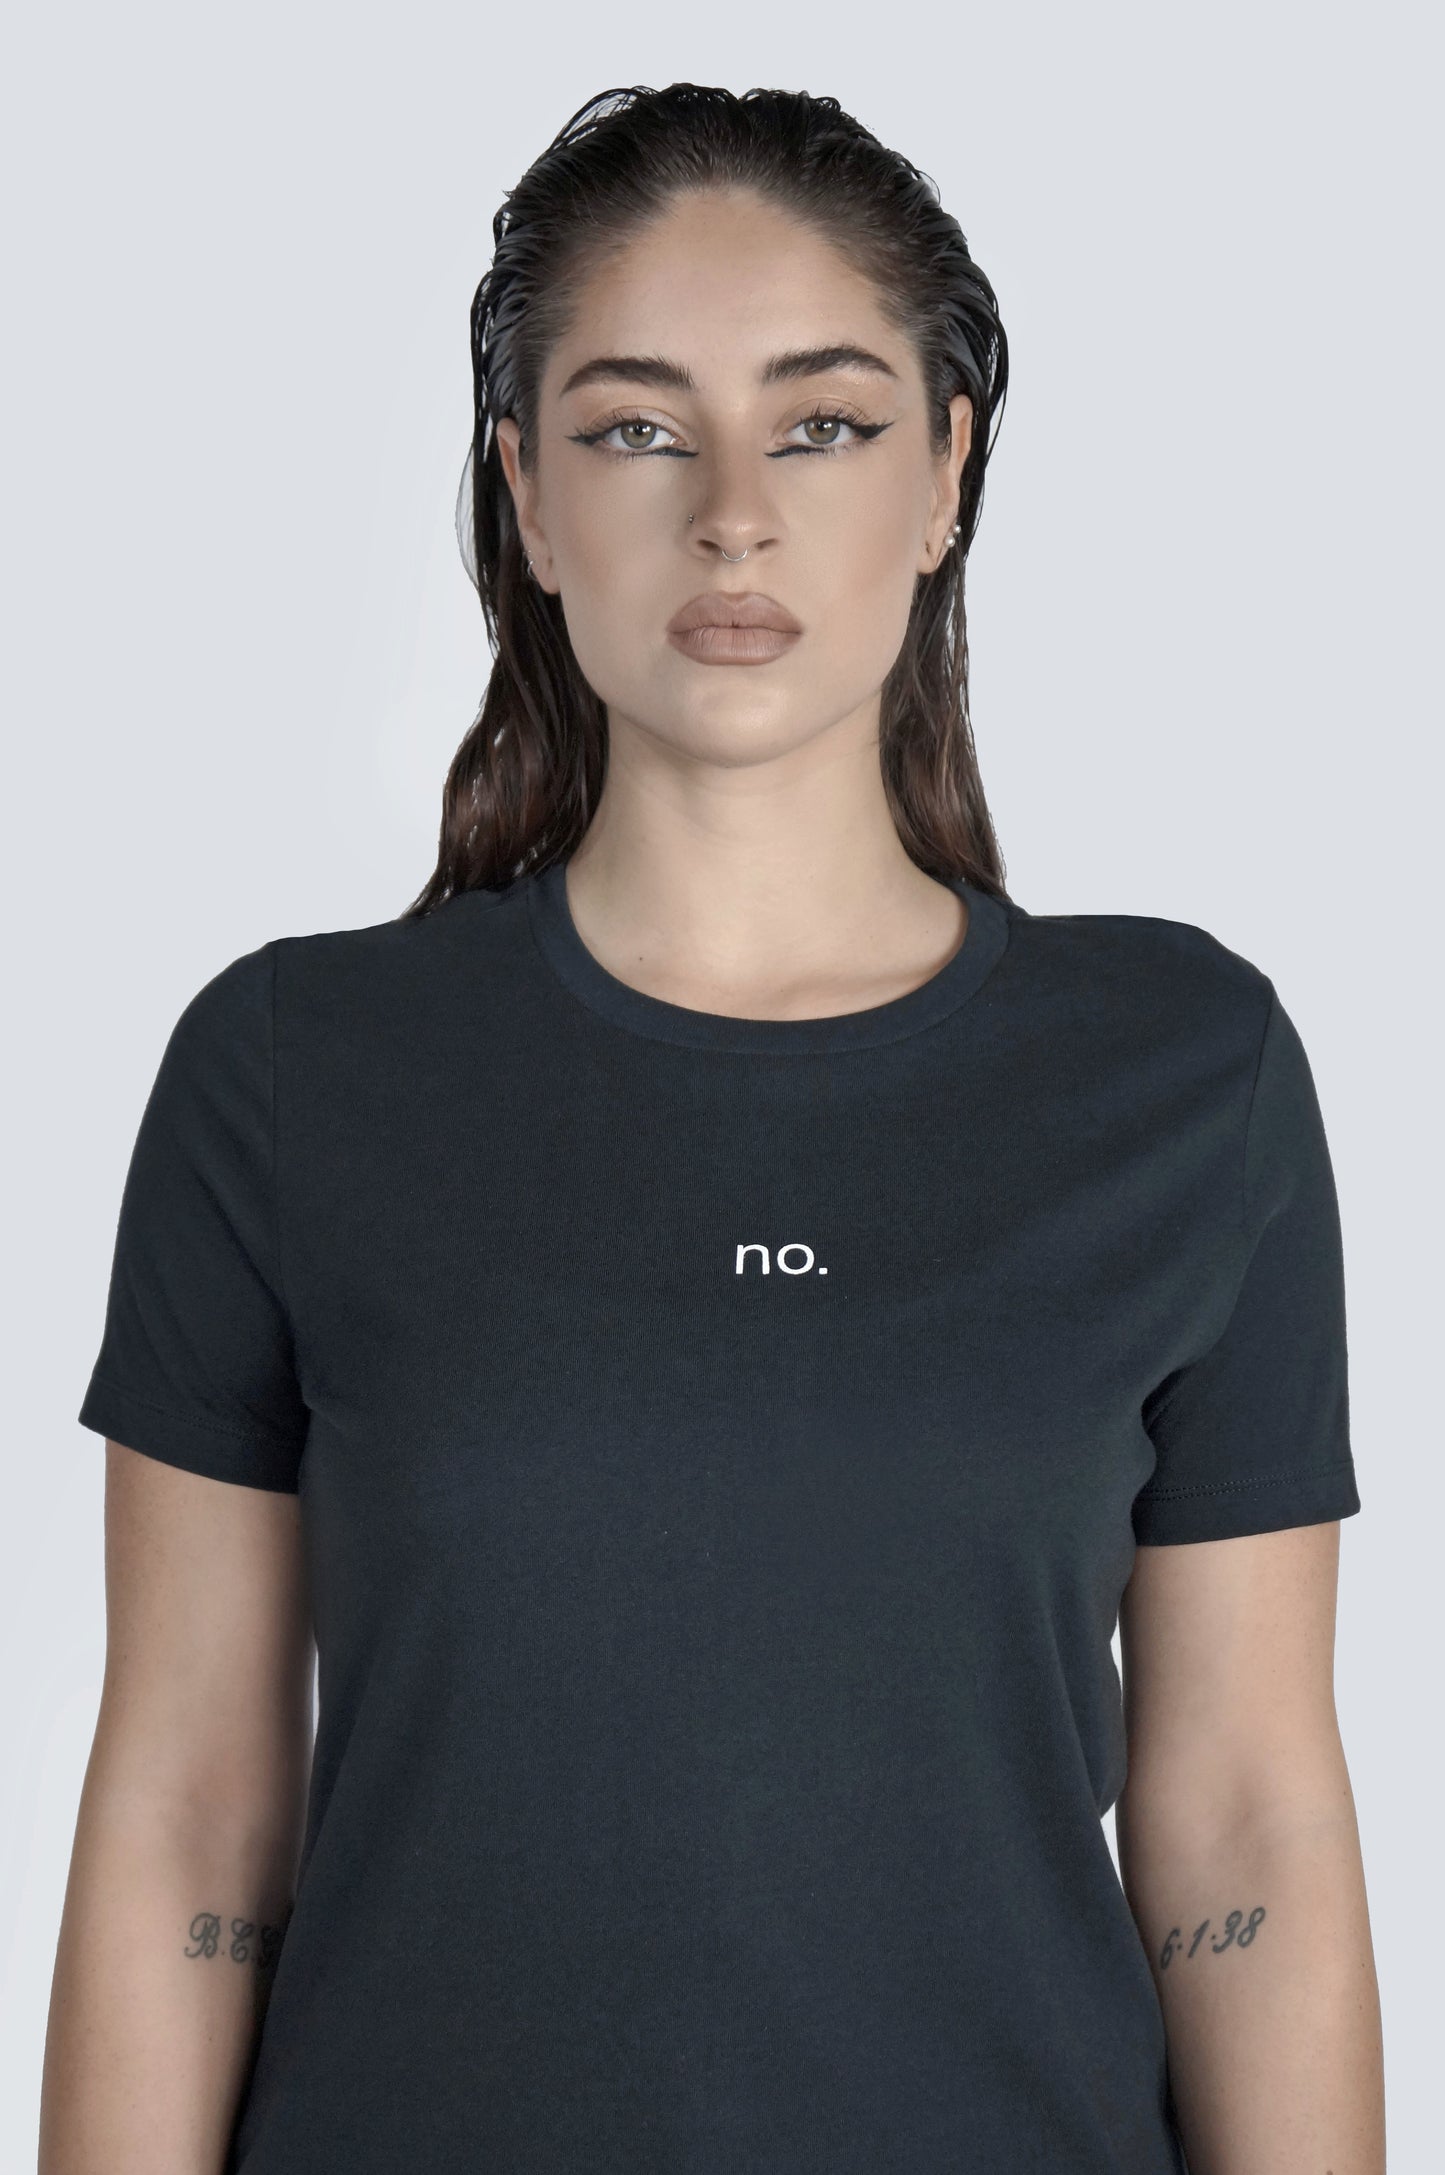 The No T-shirt in Black